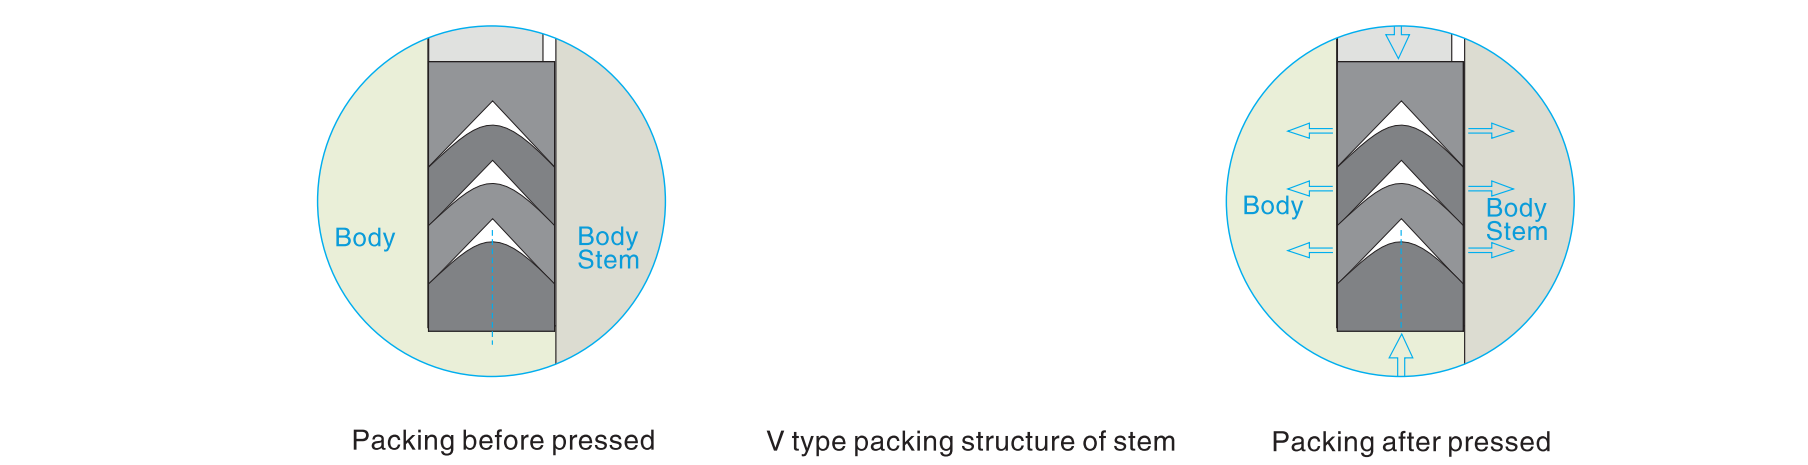 V type packing structure of stem floating ball vlaves